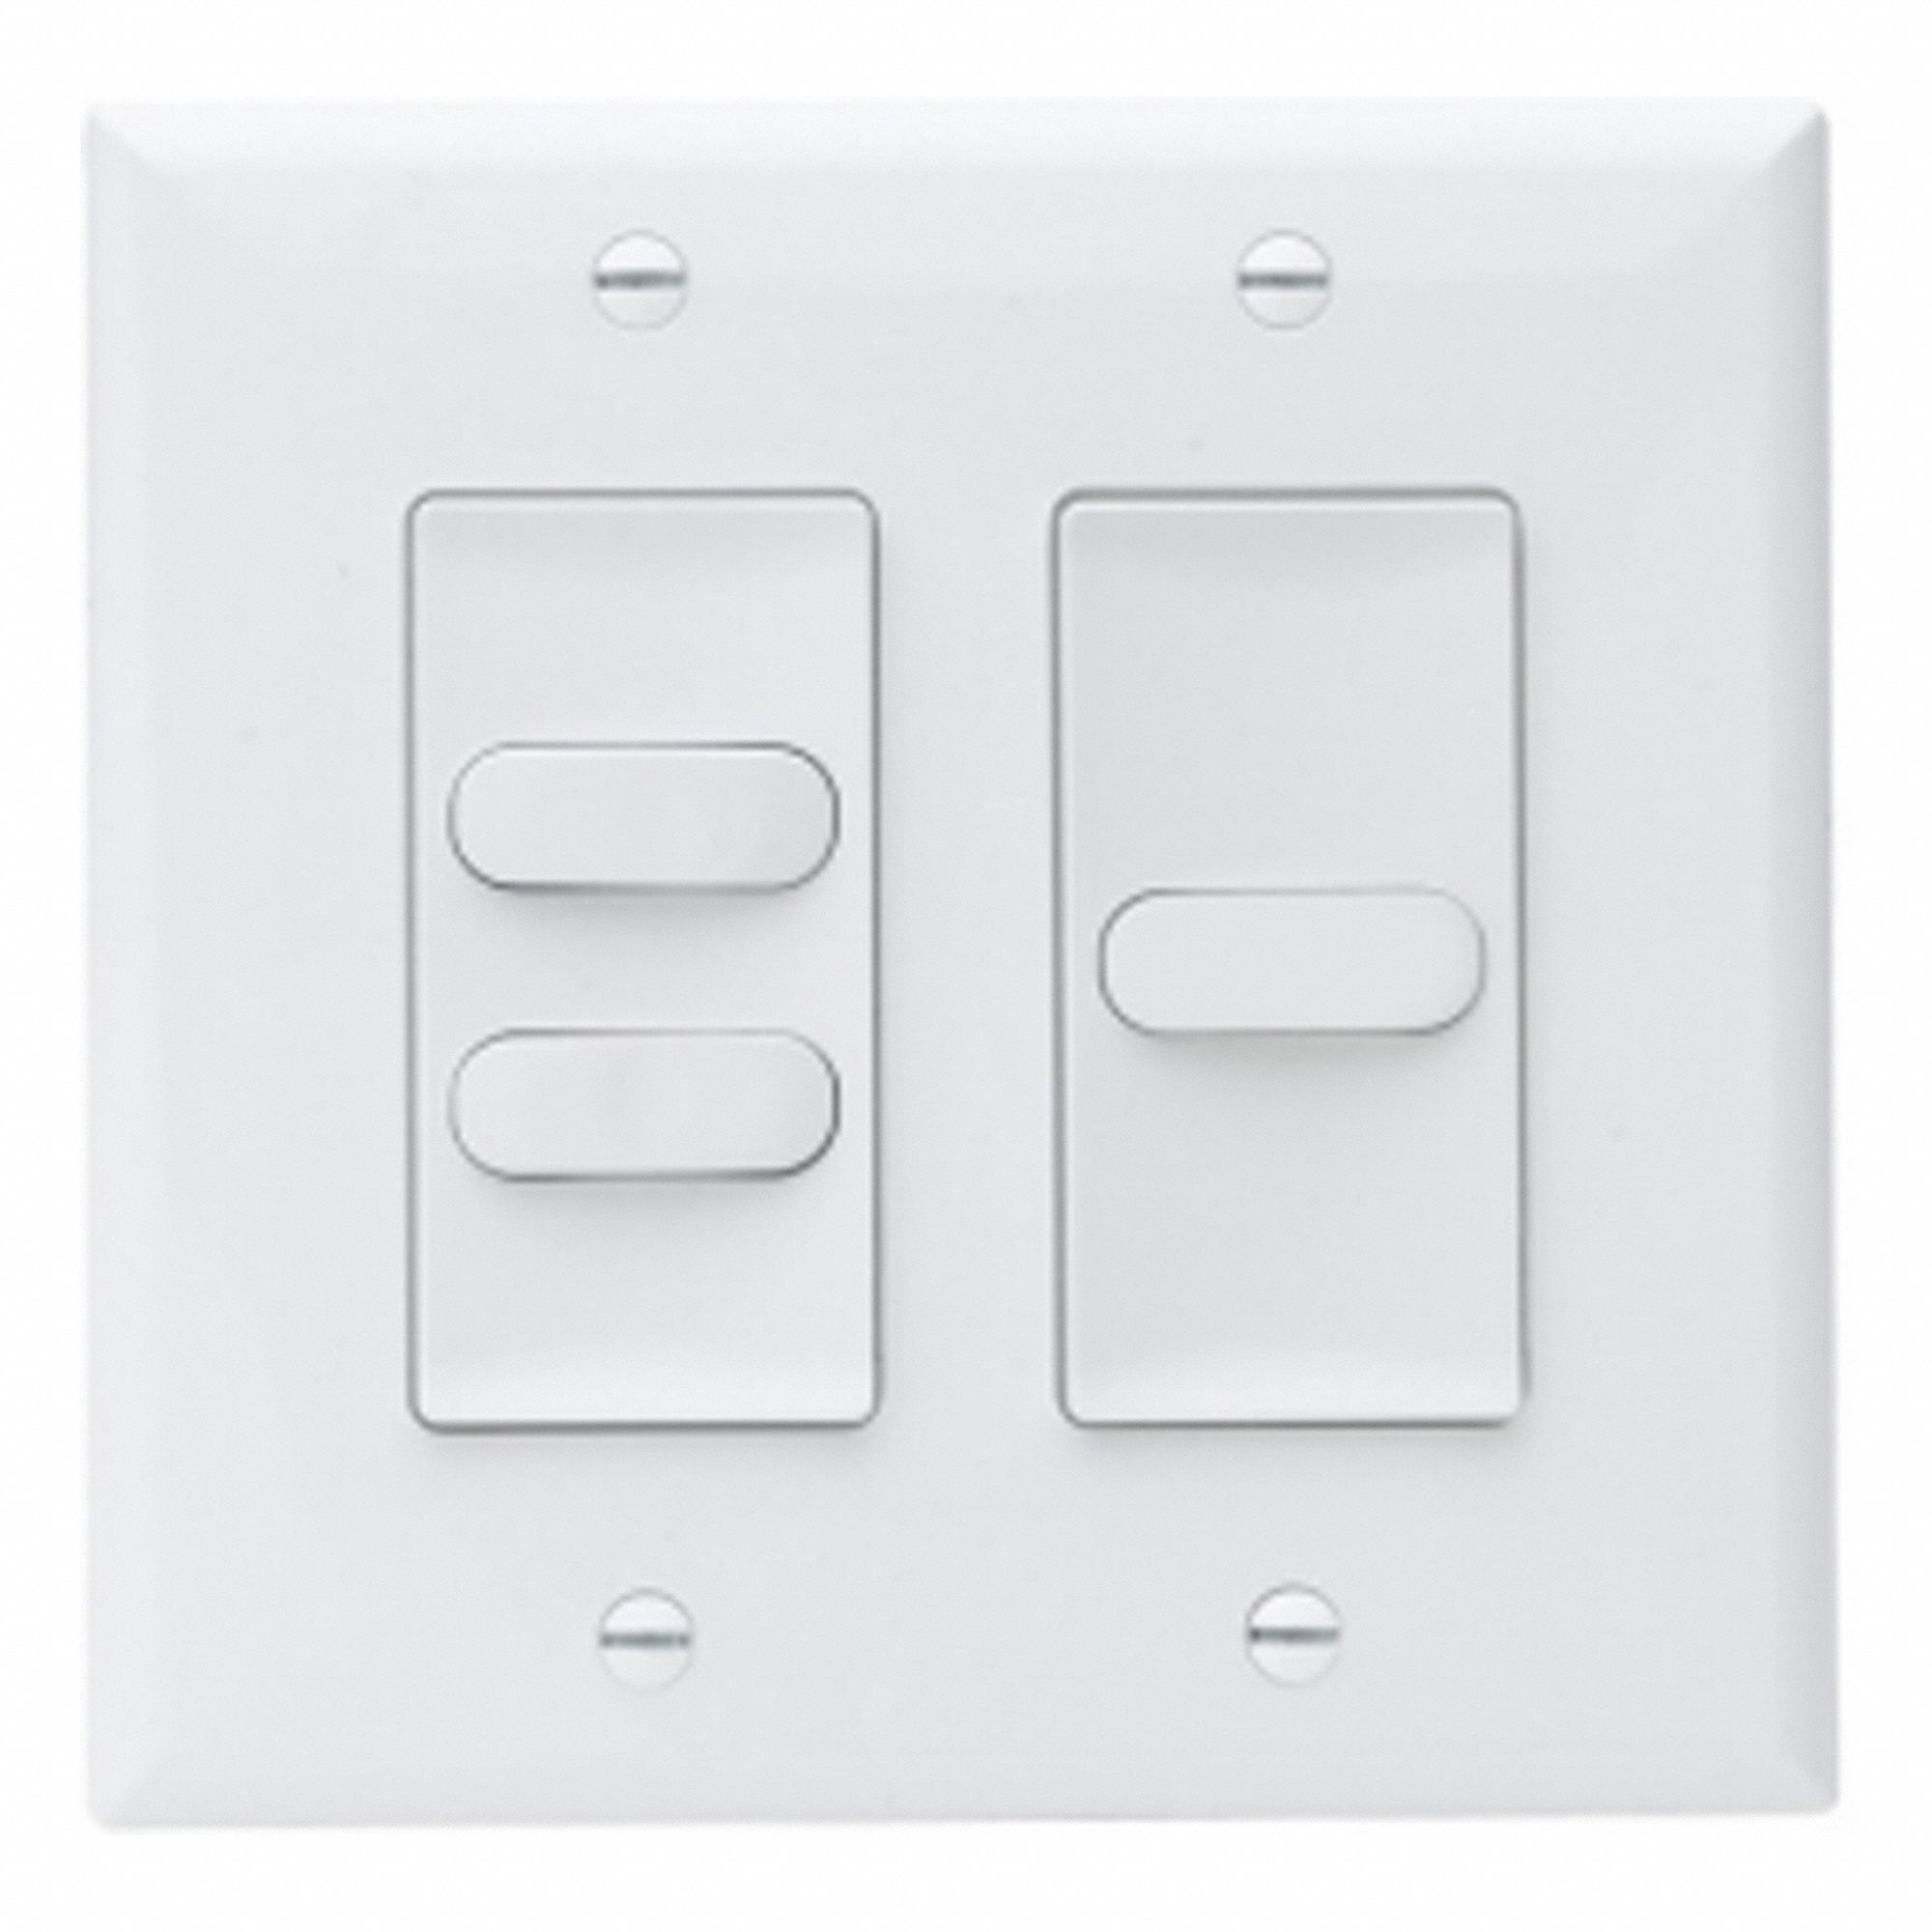 PROGRAMMABLE 3 BUTTON SWITCH, LOW VOLTAGE, ALMOND